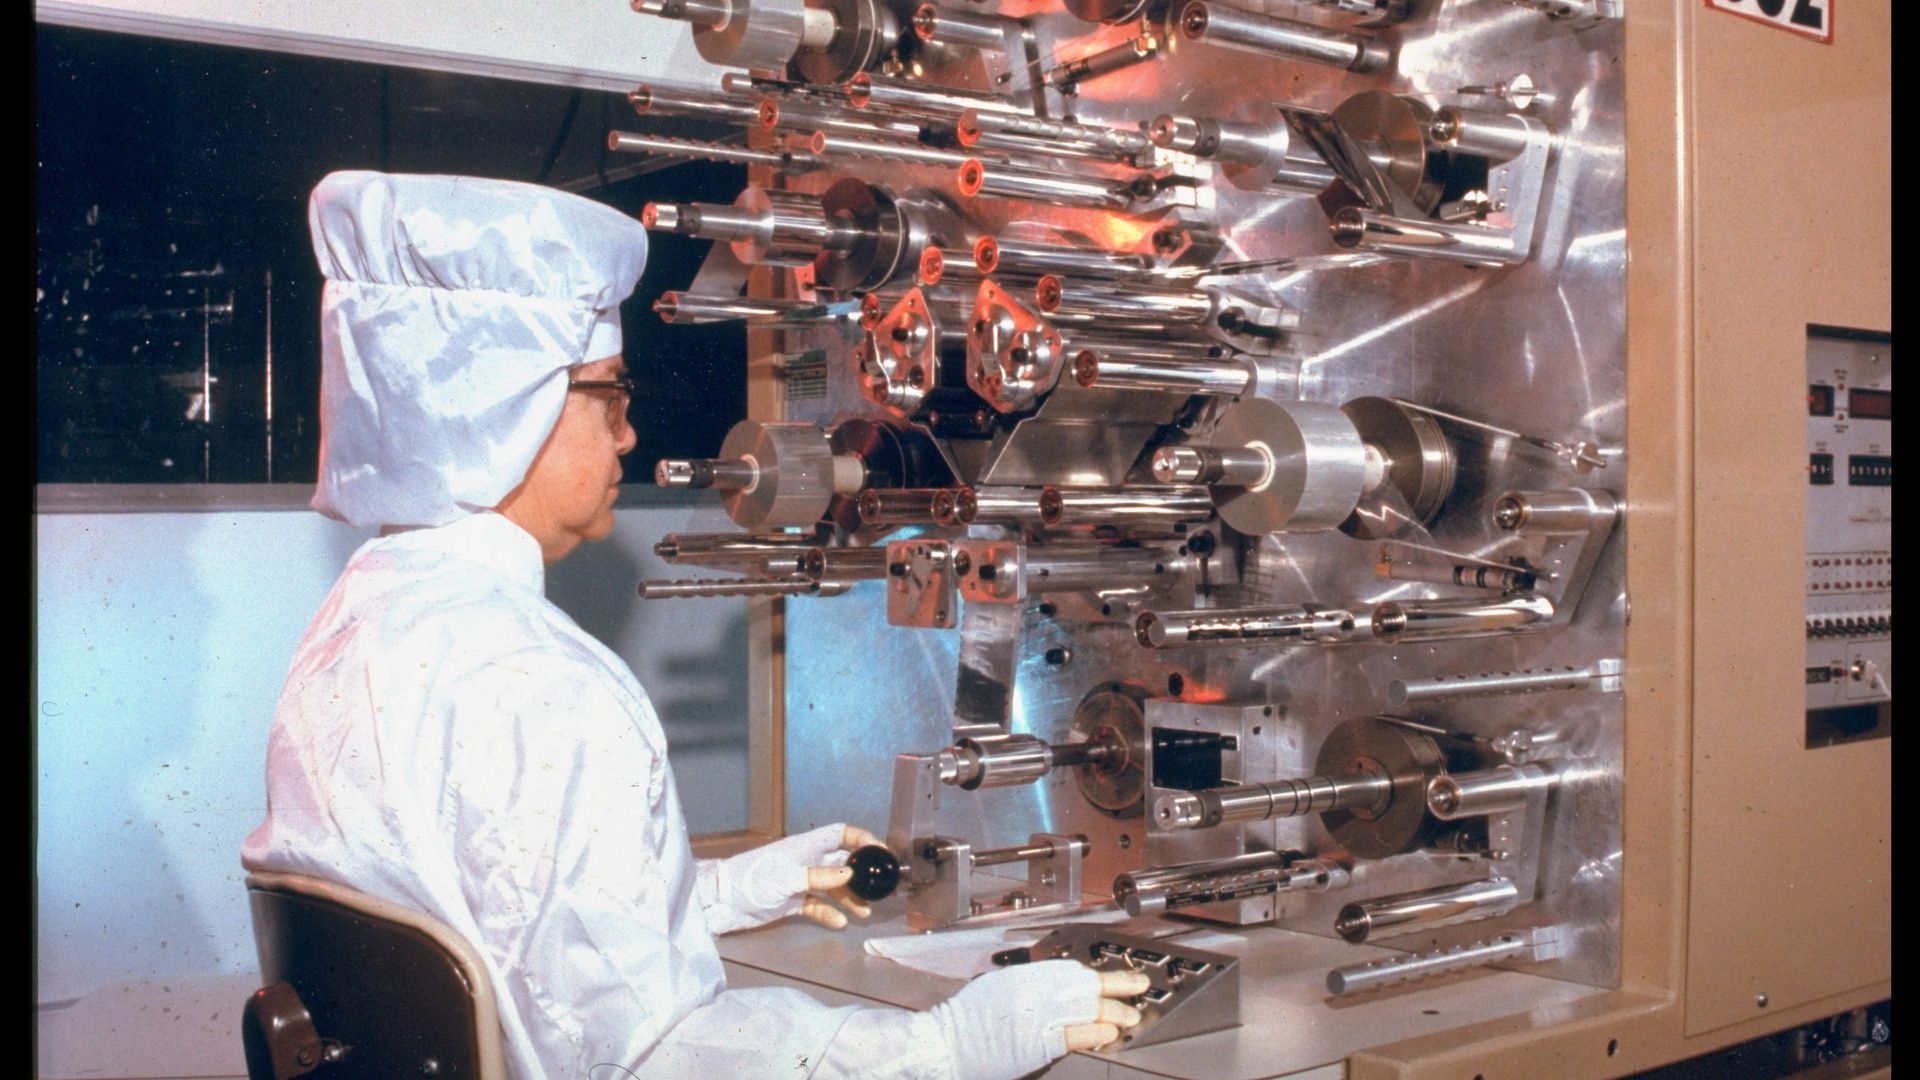 Clean-suited worker at Pinella DOE plant developing & producing (ultra-high reliability capacitators) neutron generators for nuclear weapons initiation. (Photo by Time Life Pictures/Department Of Ener